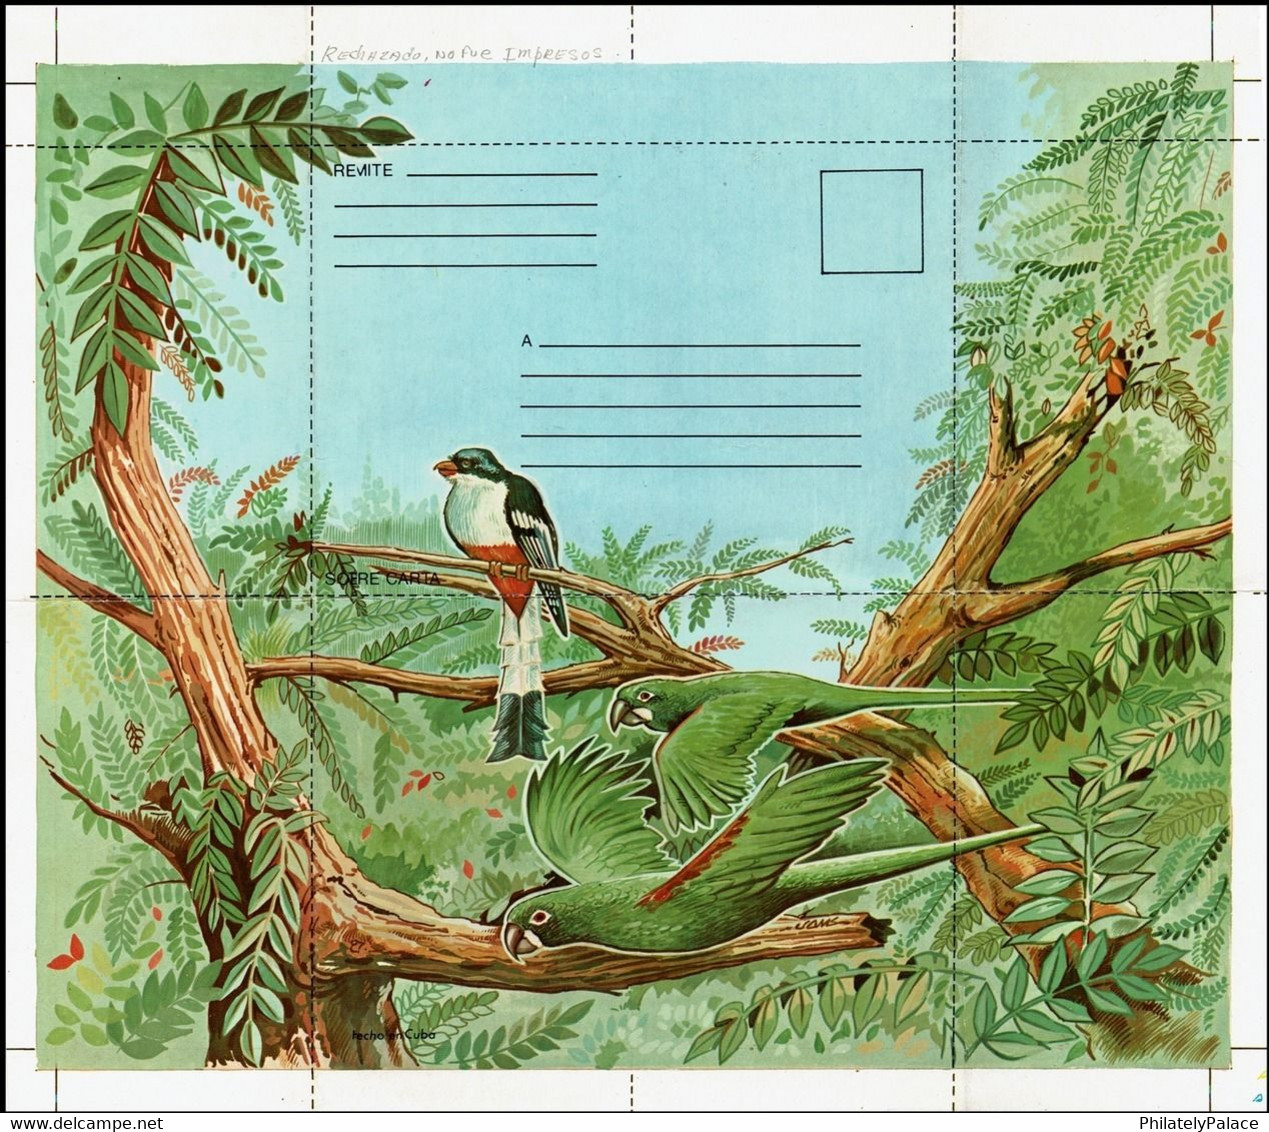 CUBA 1987 Original & Unique Test. Proof Letter Envelope Without Printed Stamp Parrot, Bird Exhibit Item ,Very Rare (**) - Covers & Documents